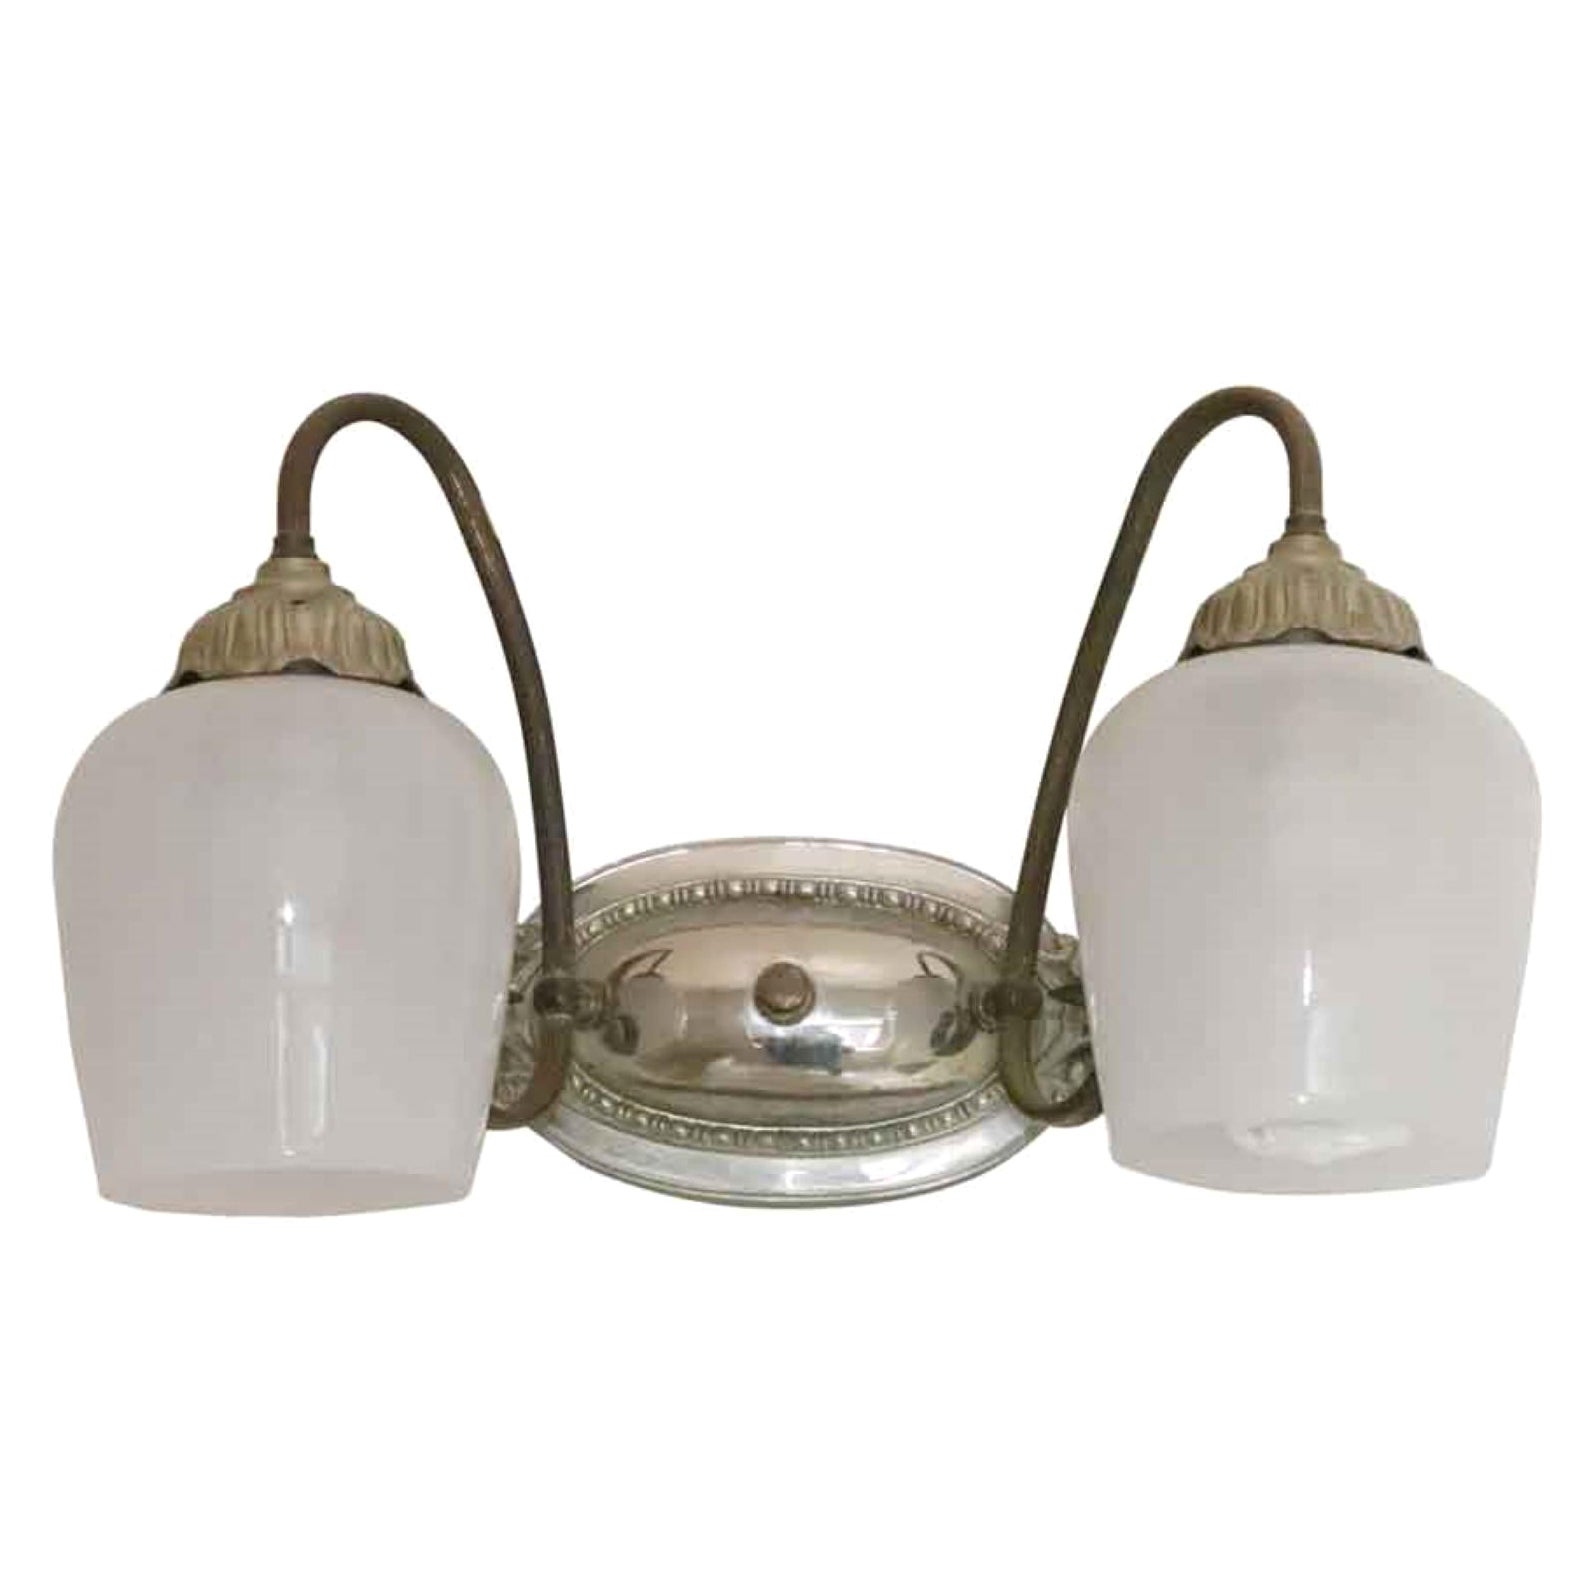 NYC Waldorf Astoria Brass & Nickel Wall Sconce w/ Two Arms Tulip Light Shades